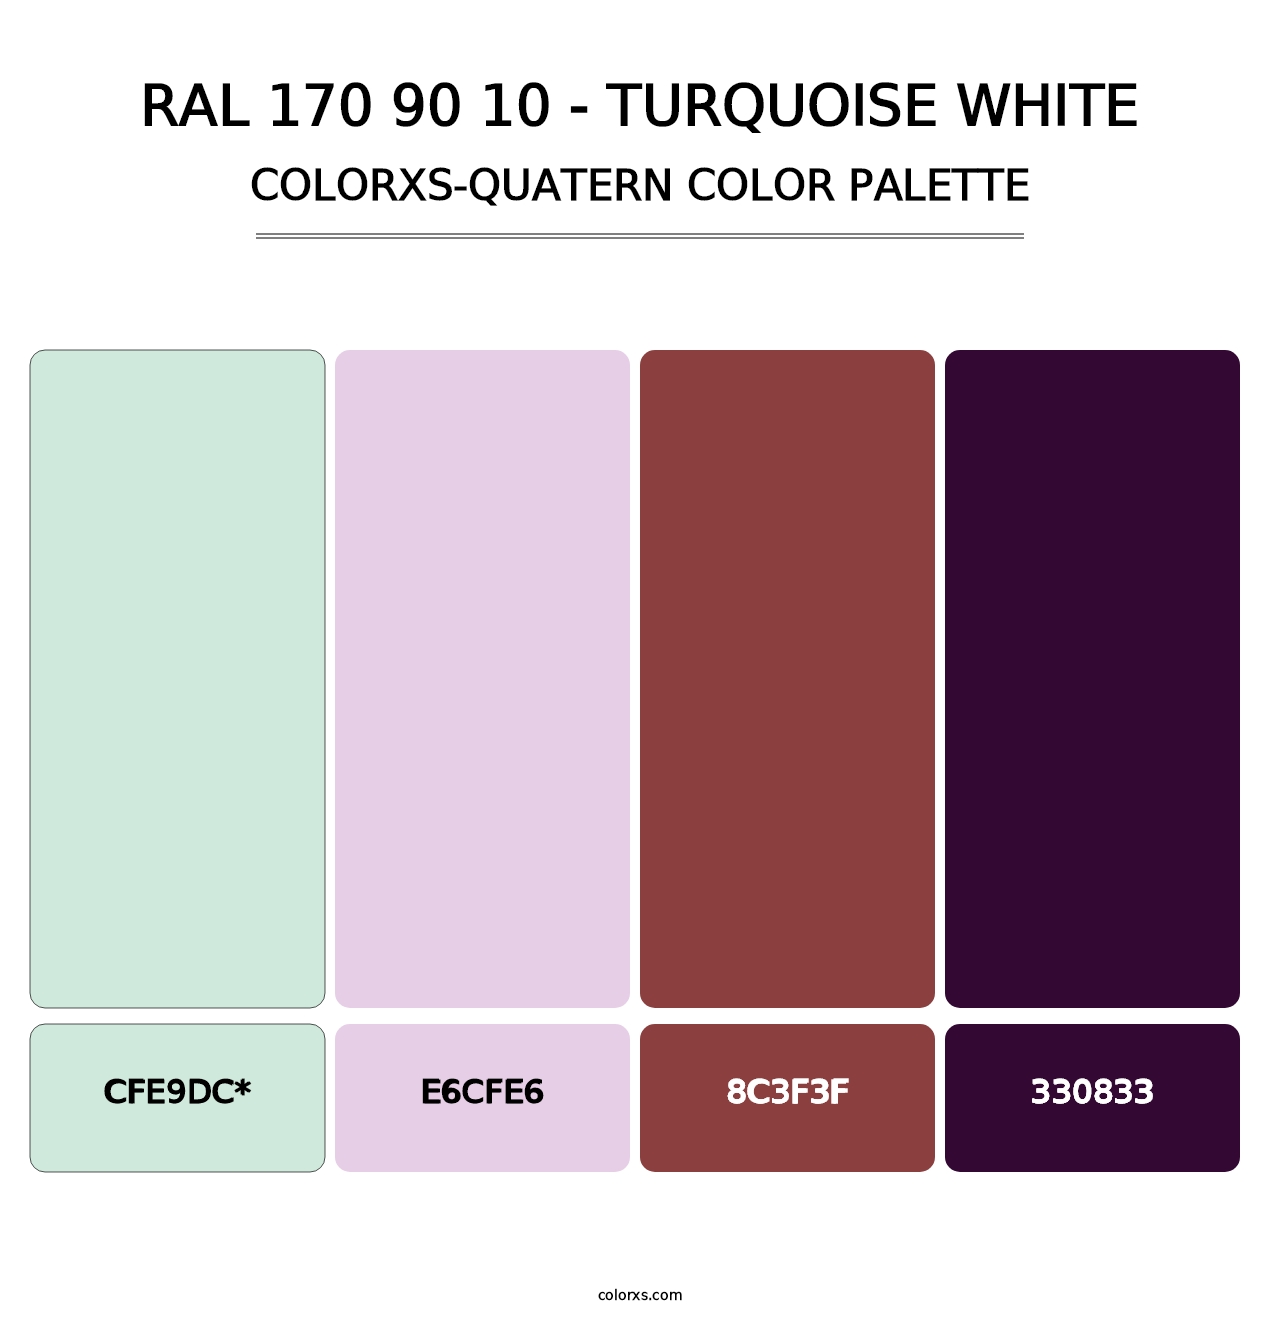 RAL 170 90 10 - Turquoise White - Colorxs Quatern Palette